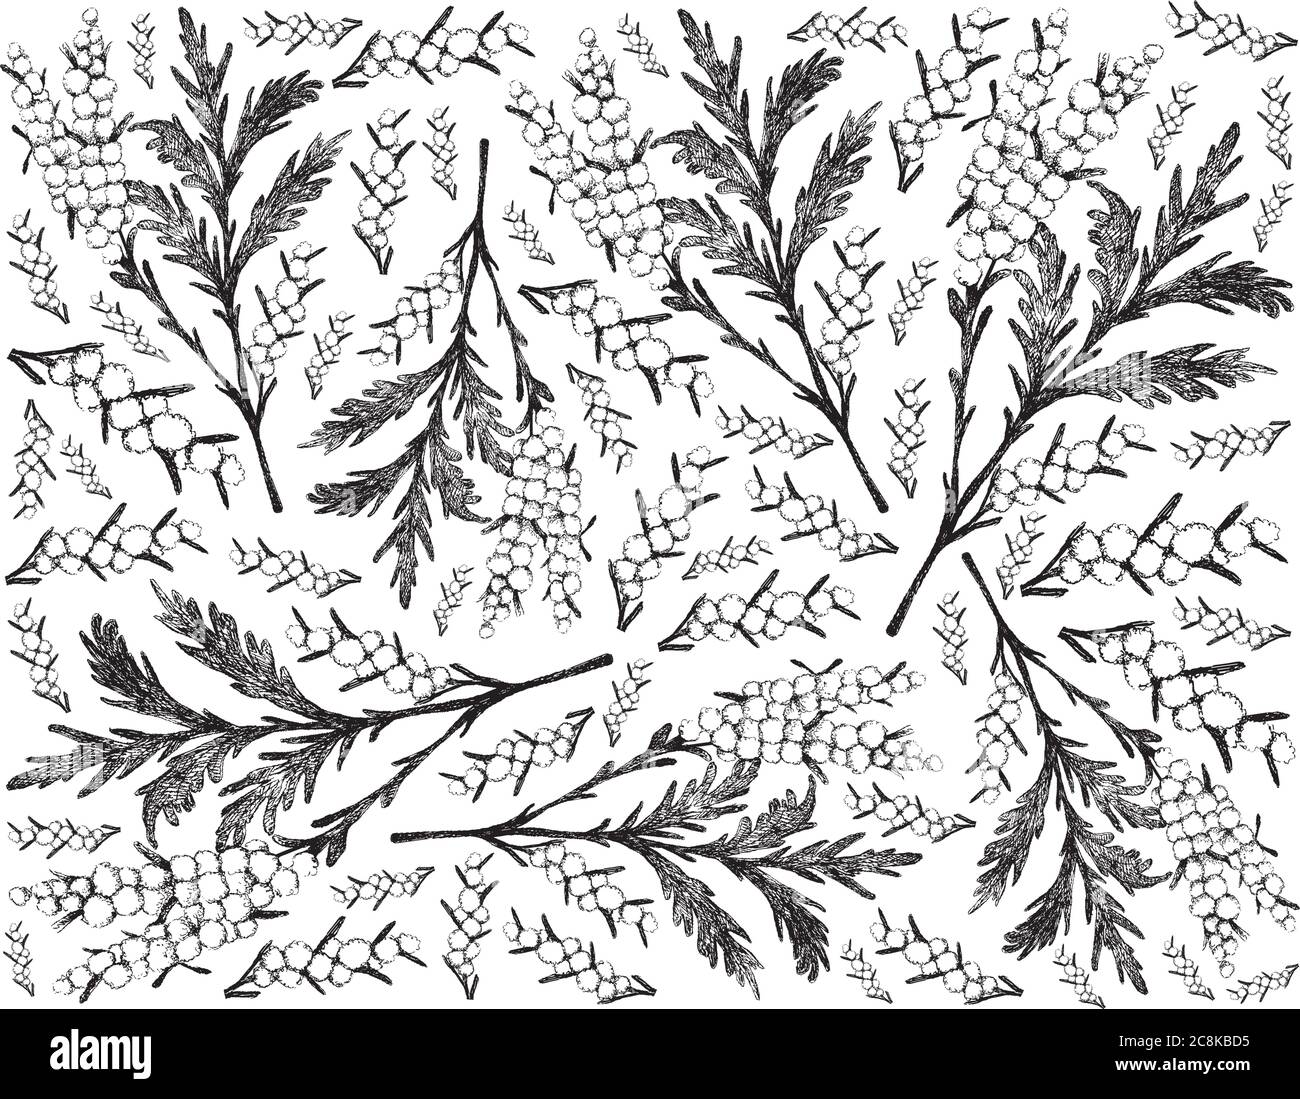 Herbal Flower and Plant, Hand Drawn Background of Artemisia Absinthium or Wormwood Plants with Yellow Flowers Used As A Fragrance and Traditional Medi Stock Vector